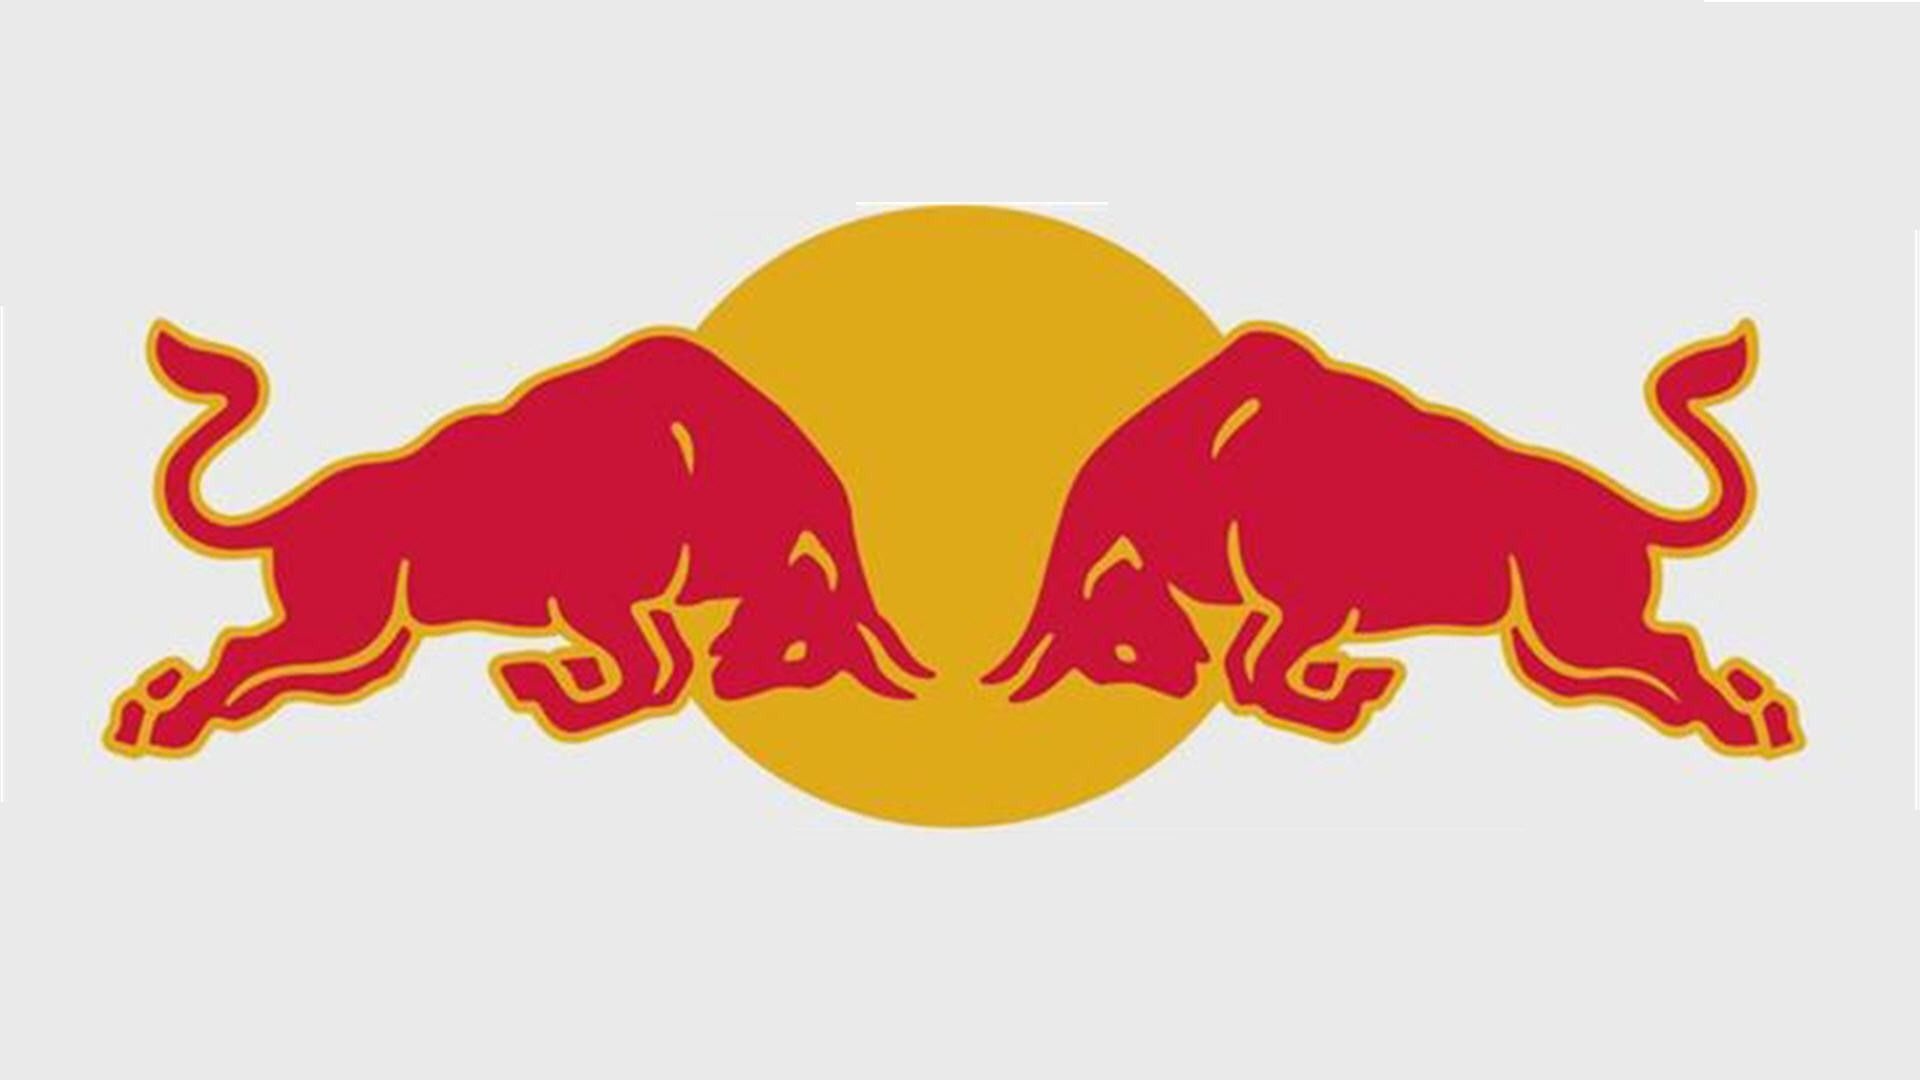 Red Bull Logo: A bull symbolizes strength, confidence, stability, and stamina, Emblem. 1920x1080 Full HD Wallpaper.